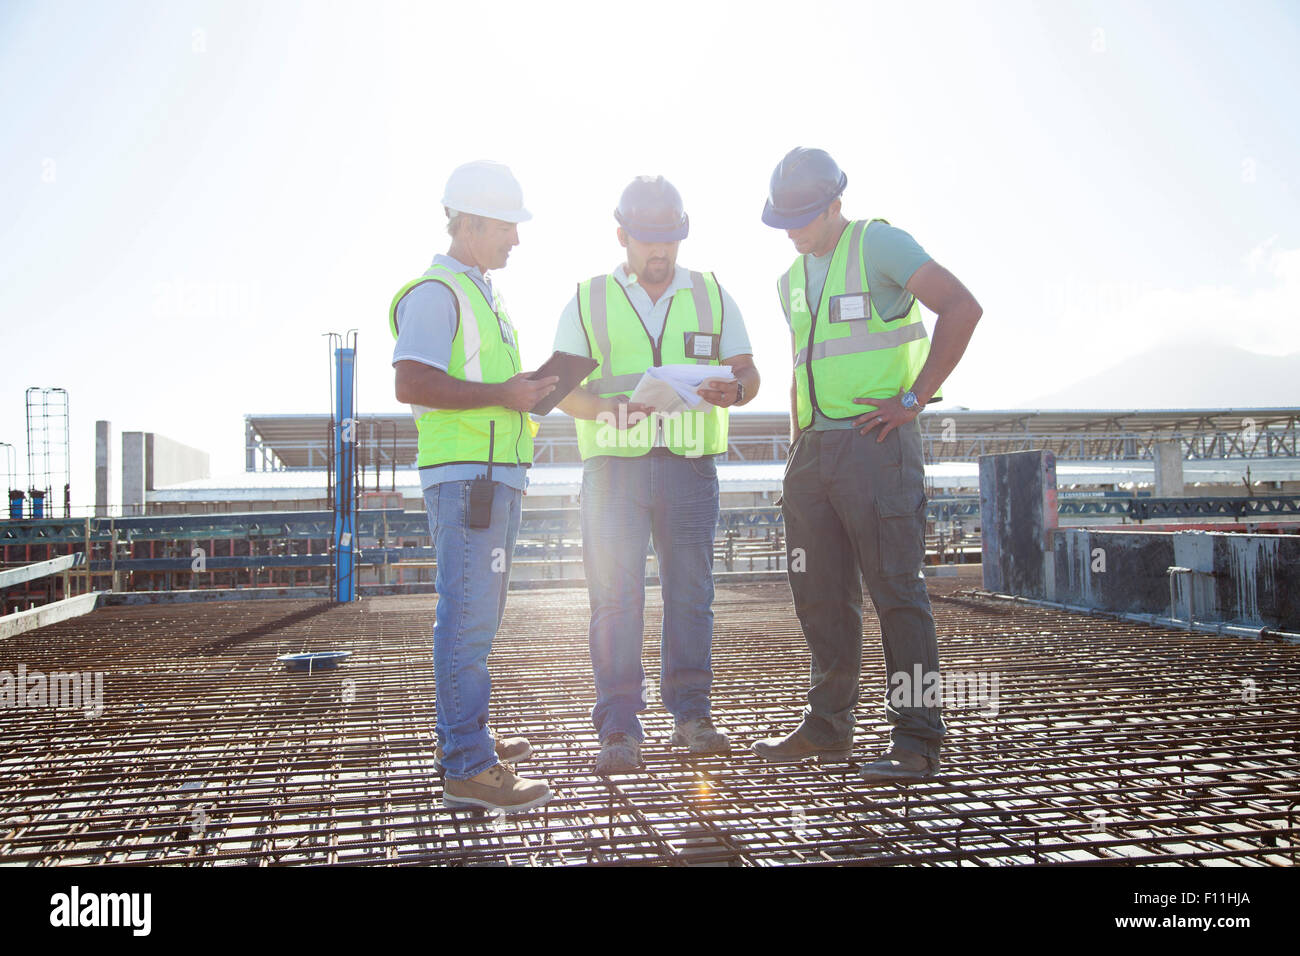 Construction workers talking on rebar at construction site Stock Photo